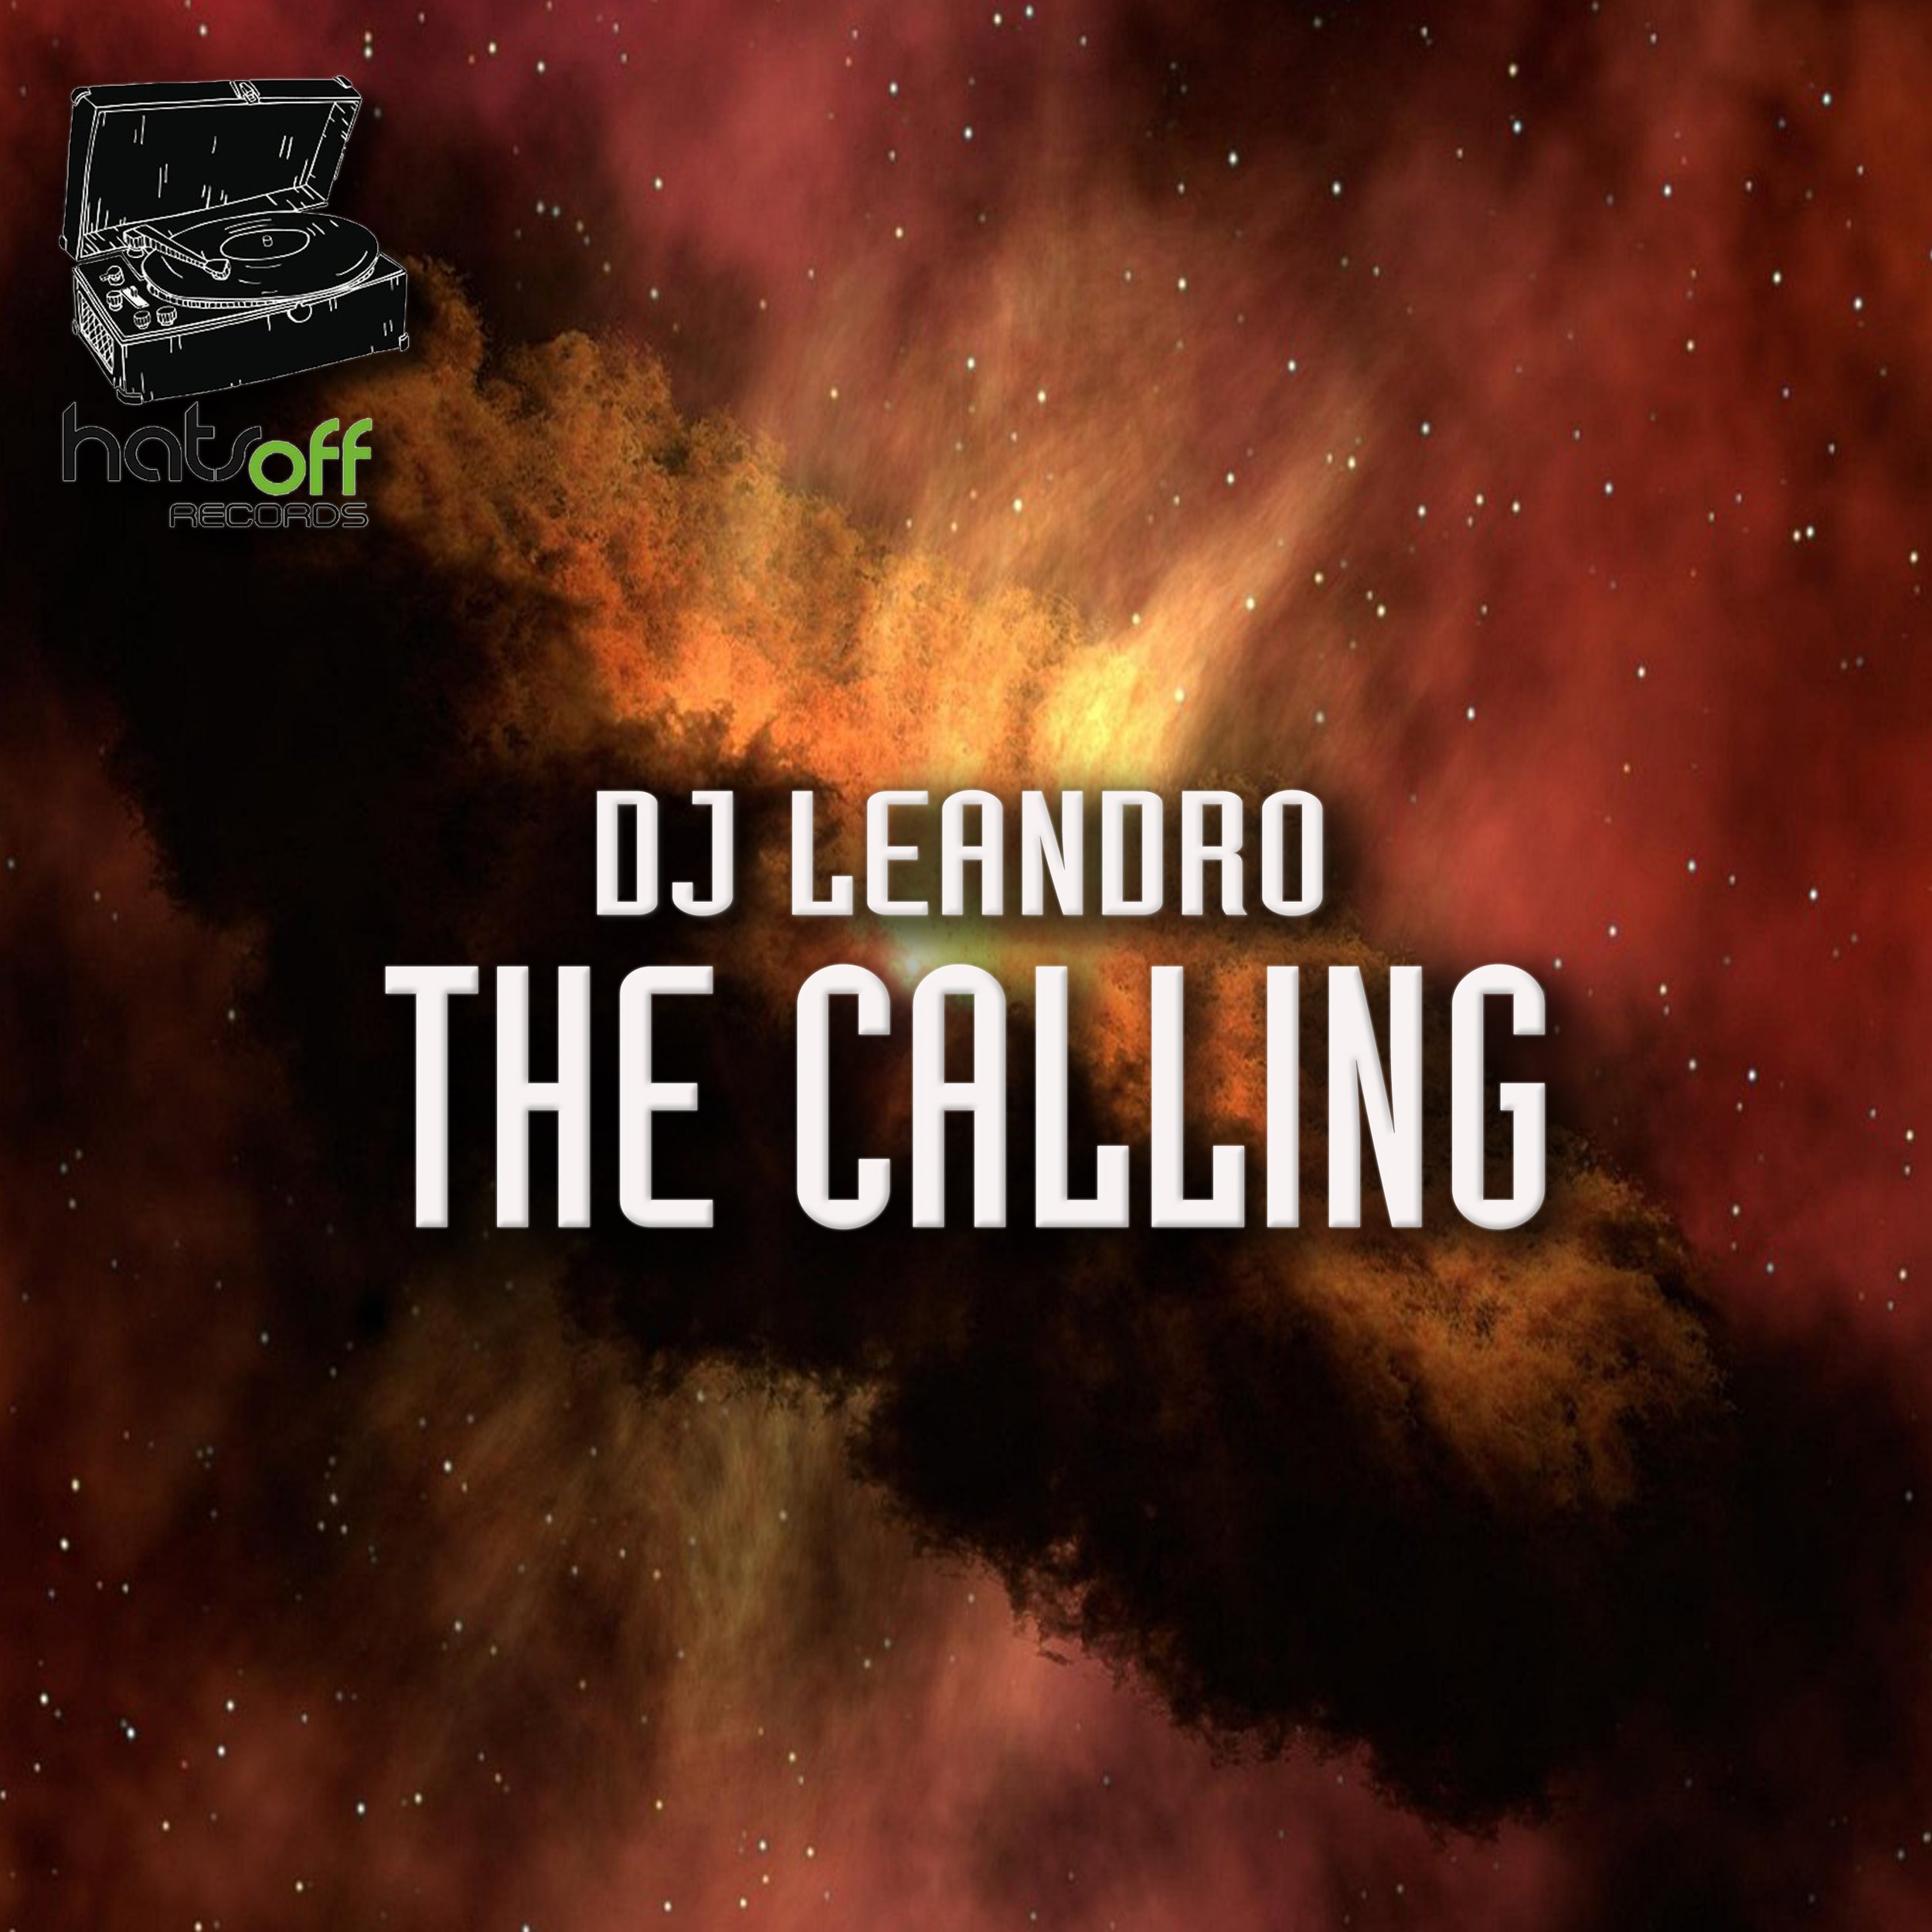 The Calling (Hats Off Records)